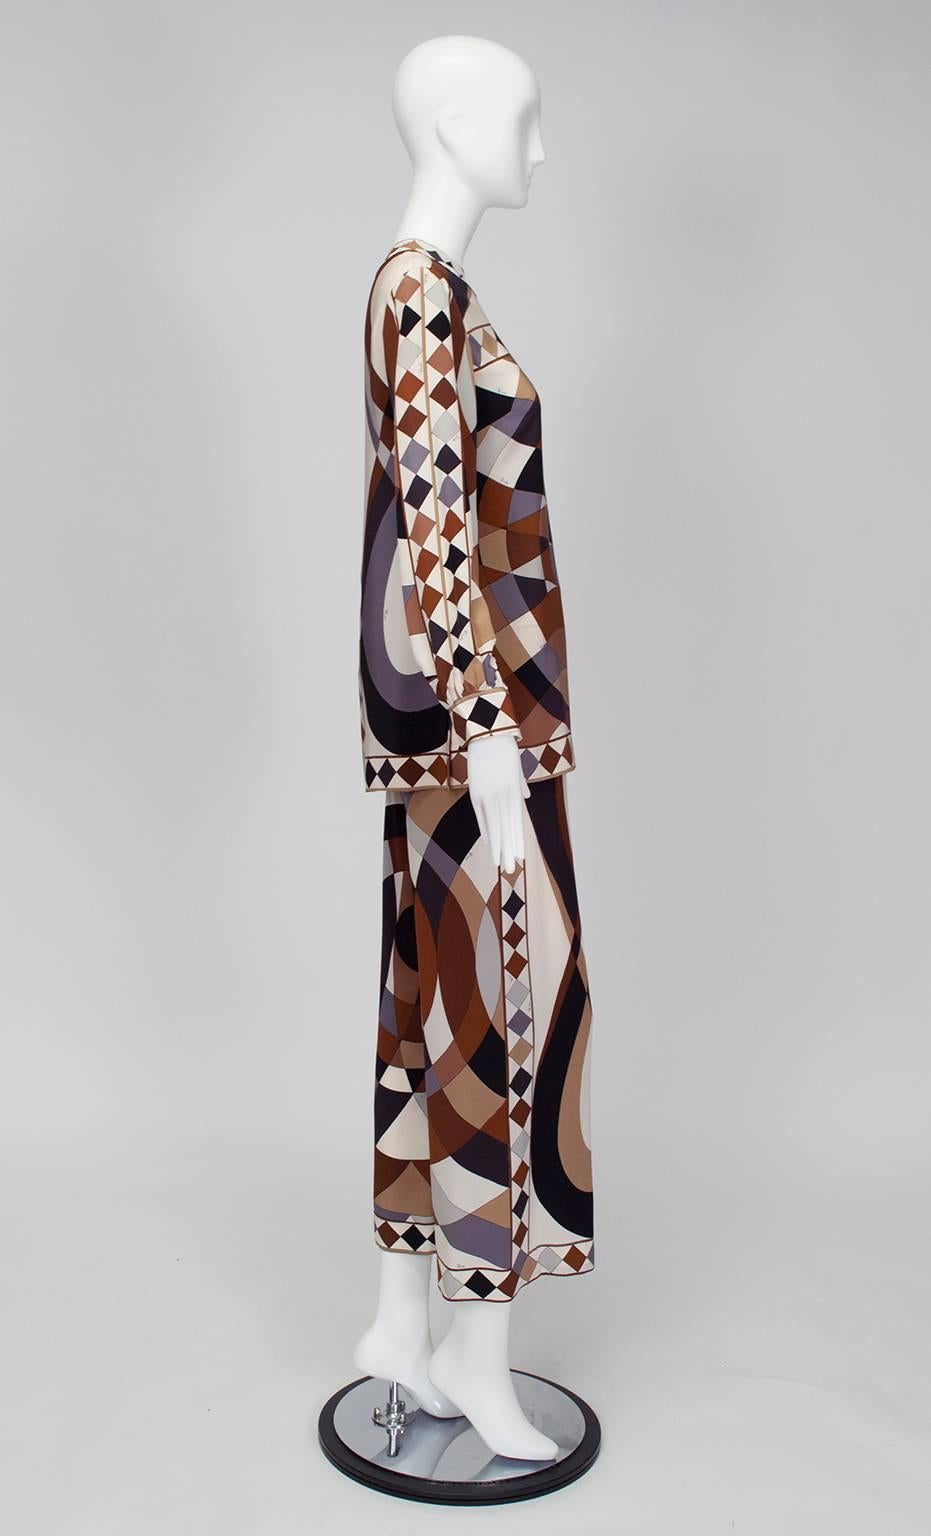 Instantly recognizable for their kaleidoscopic prints, Pucci garments are beloved for their offhand luxury; 2-piece sets such as this one are especially coveted because they pair so easily with other wardrobe basics. This particular ensemble is